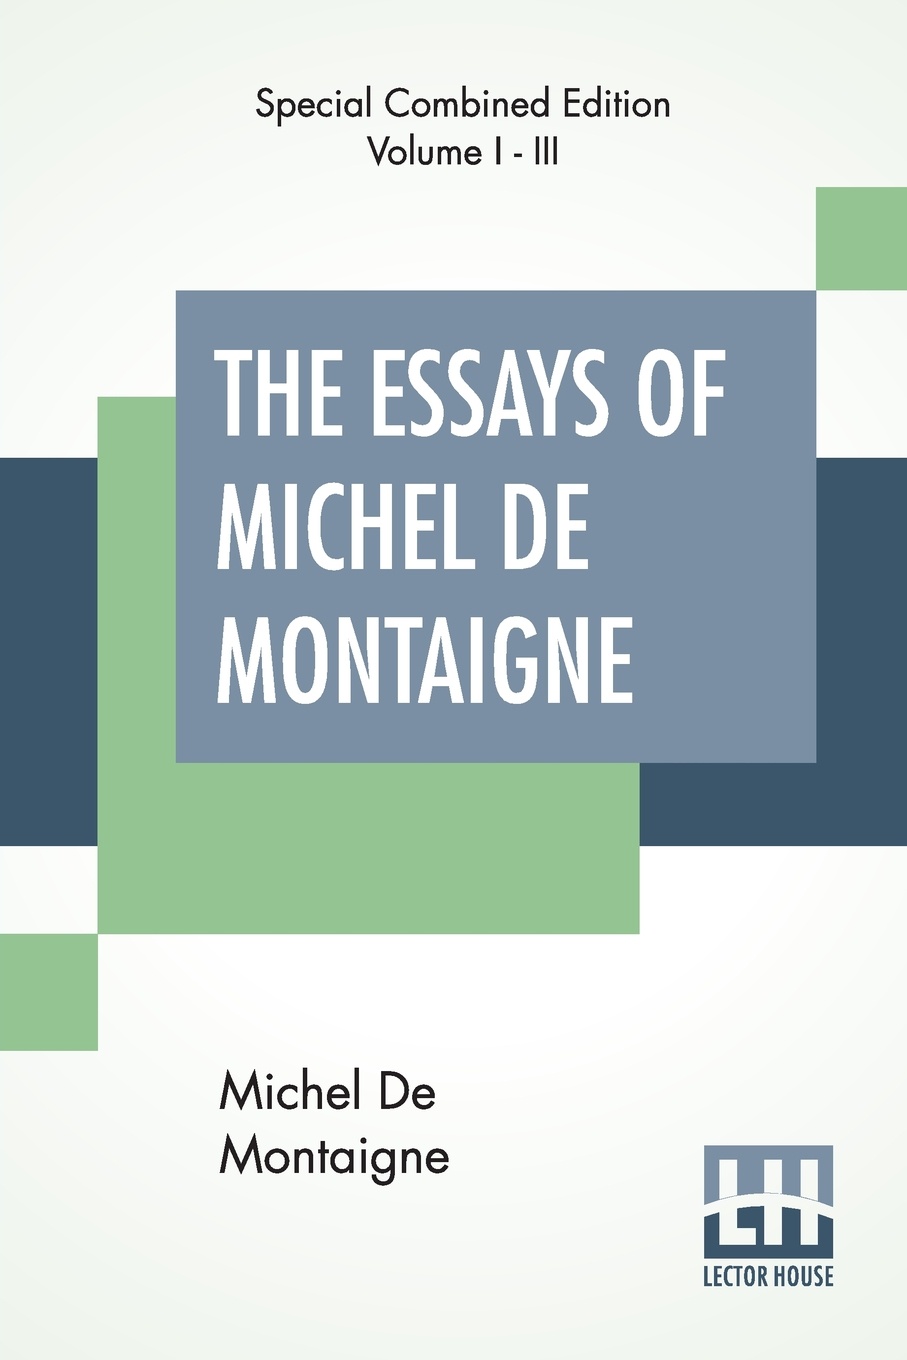 The Essays Of Michel De Montaigne (Complete). Translated By Charles Cotton. Edited By William Carew Hazlitt.